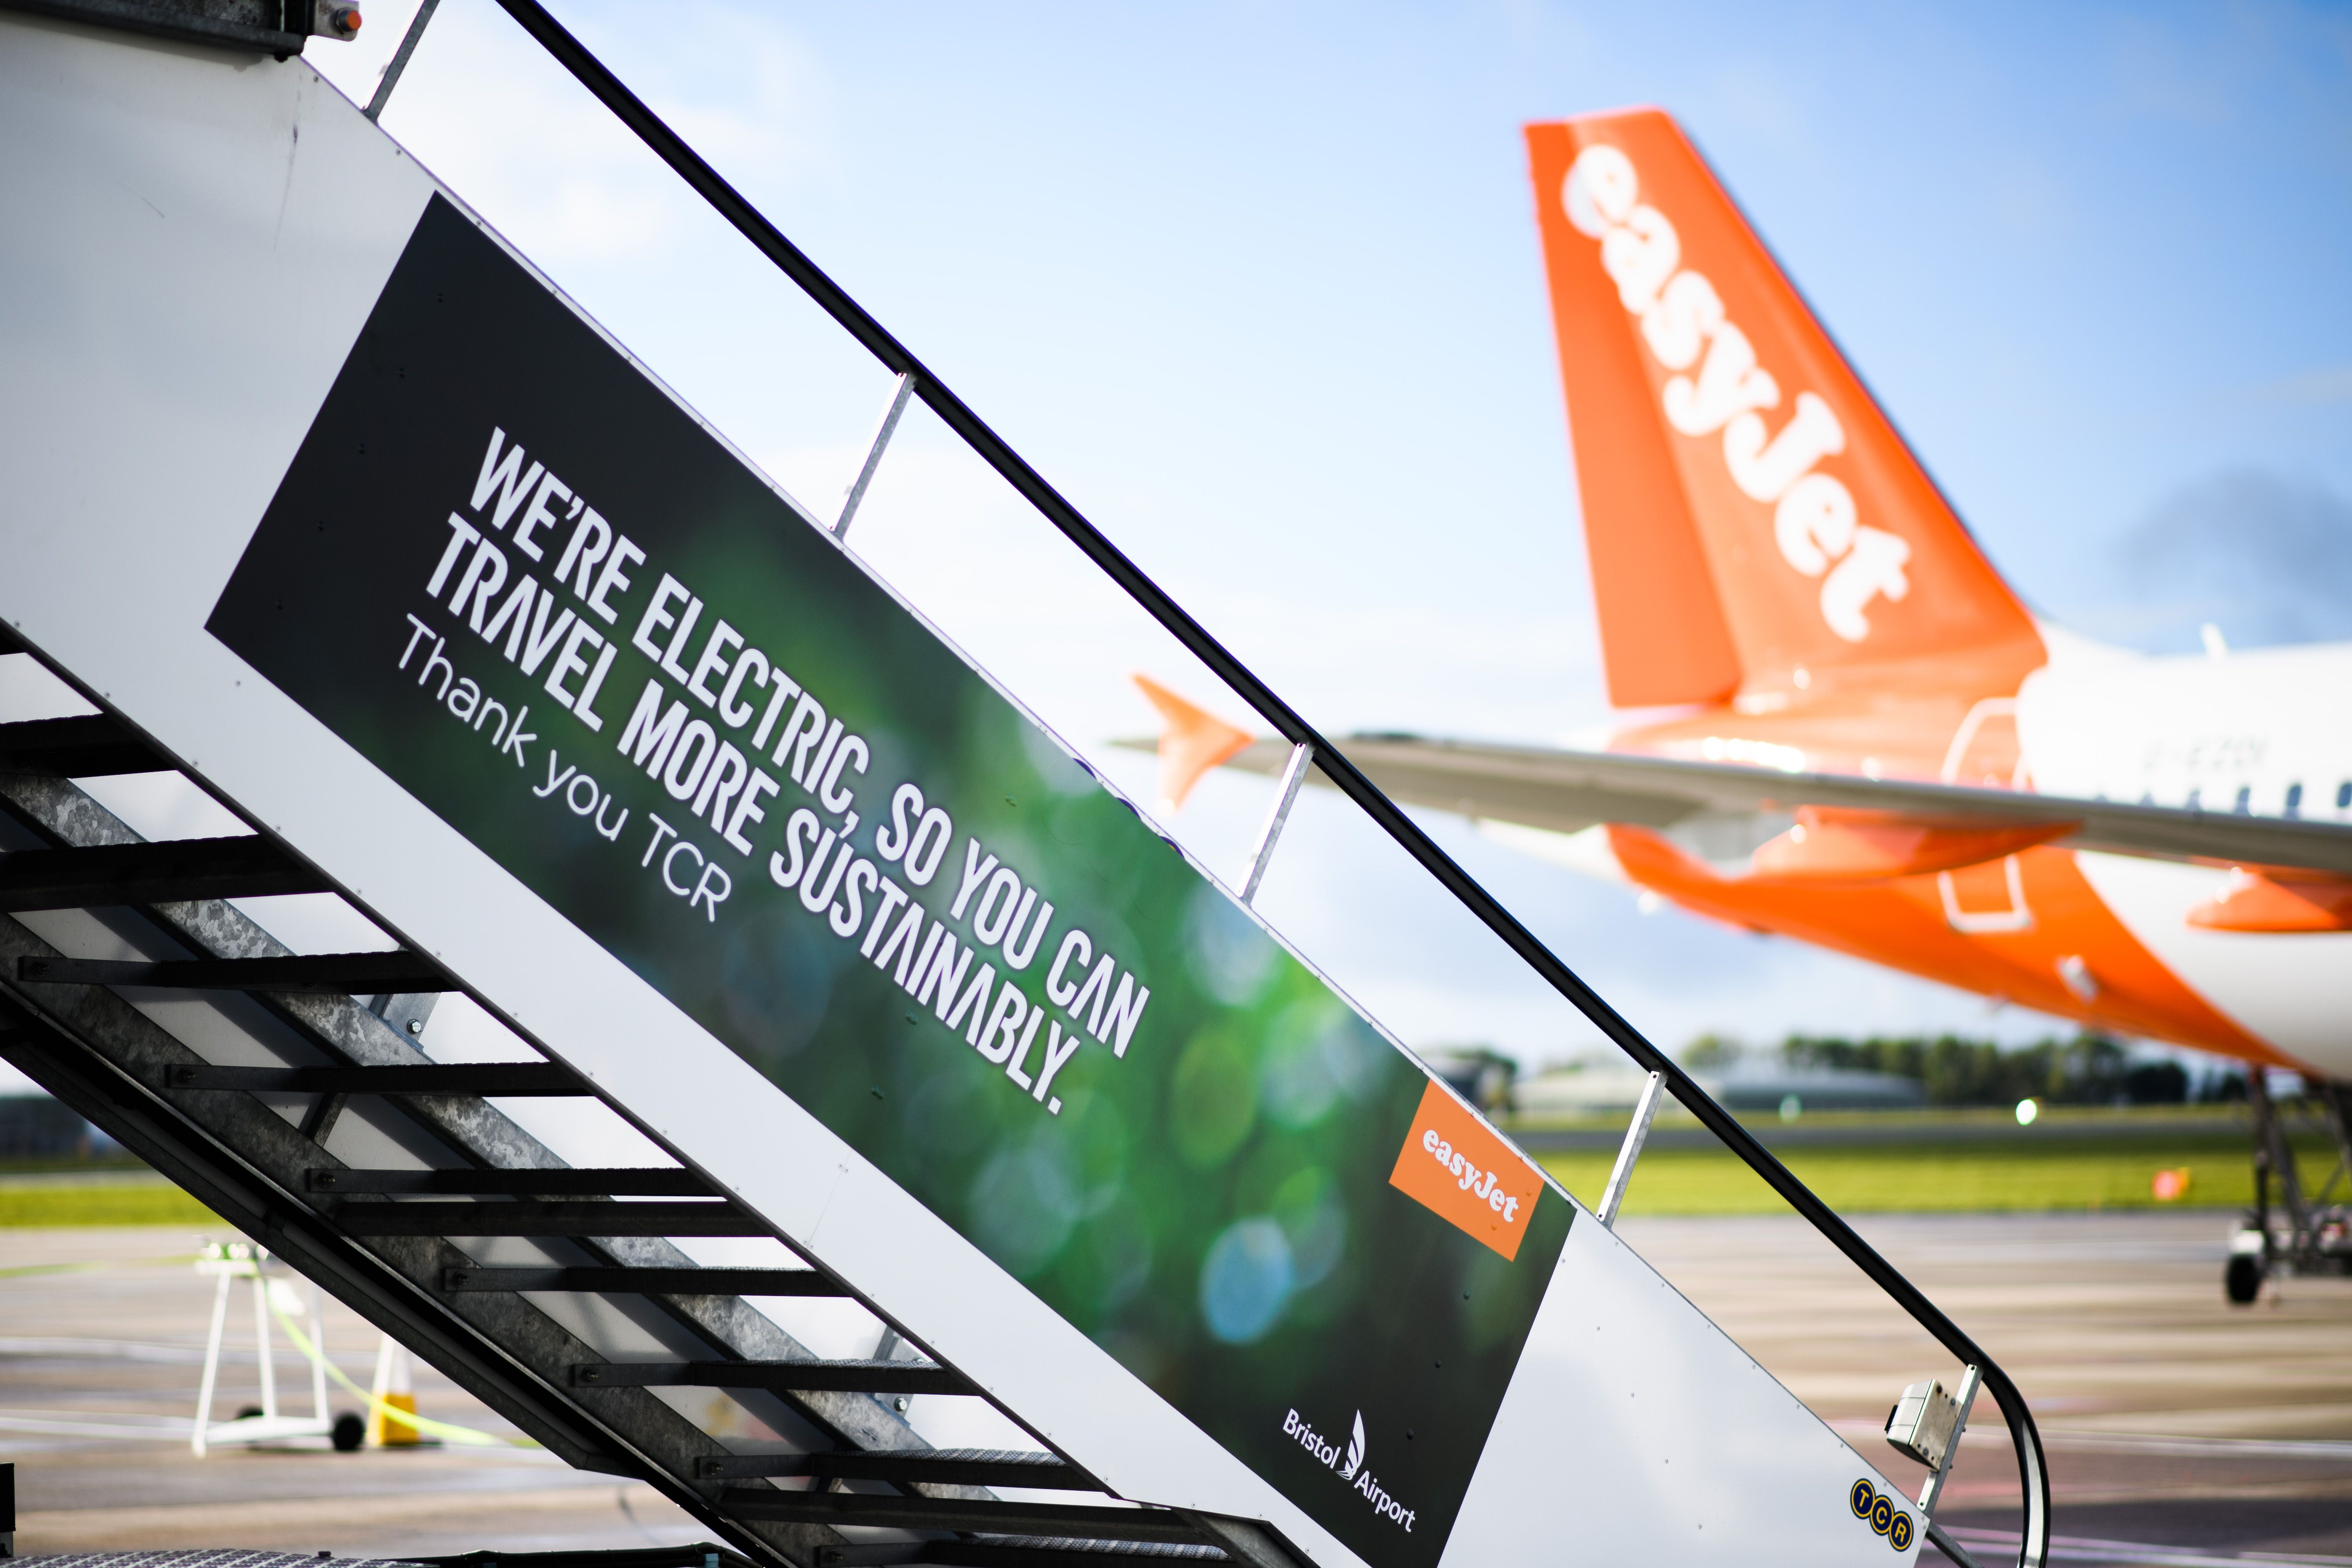 BRISTOL_AIRPORT easyjet electric pilot ground support trial